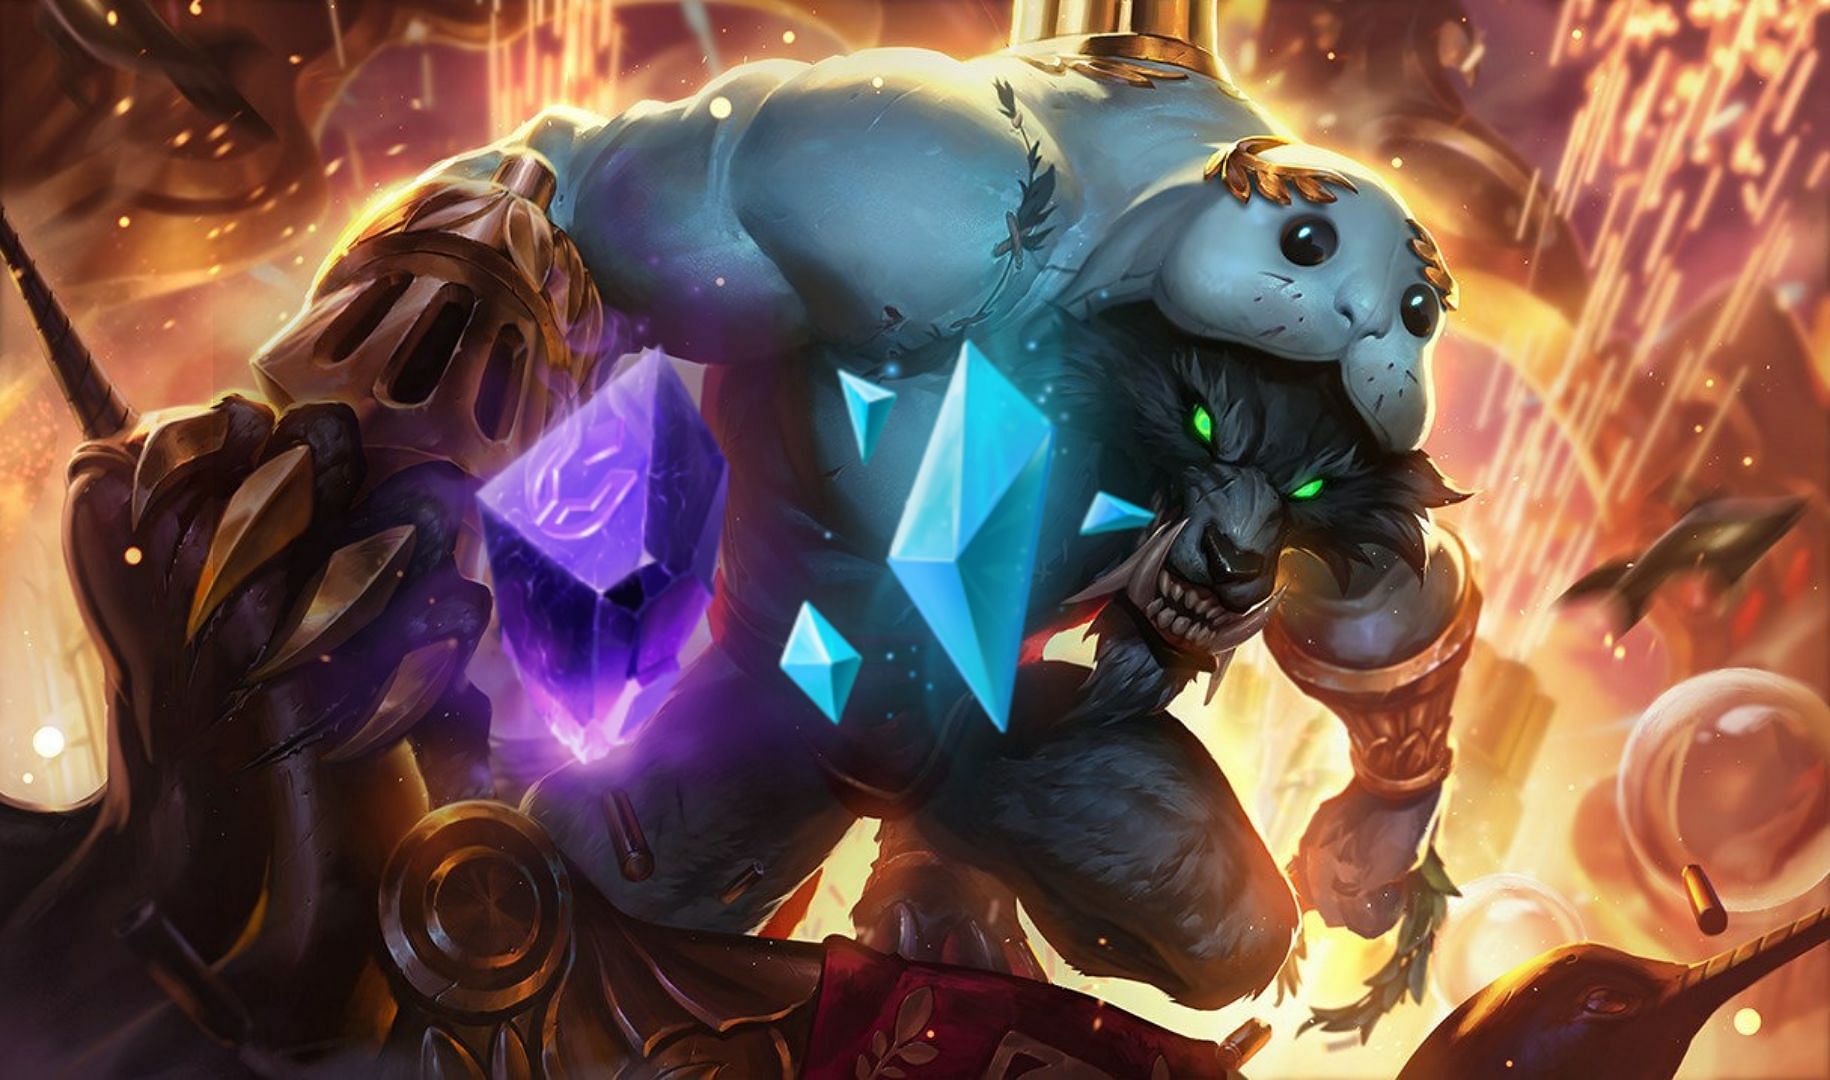 Urfwick skin will be available for League of Legends players during Essence Emporium 2022 (Image via Riot Games - League of Legends)